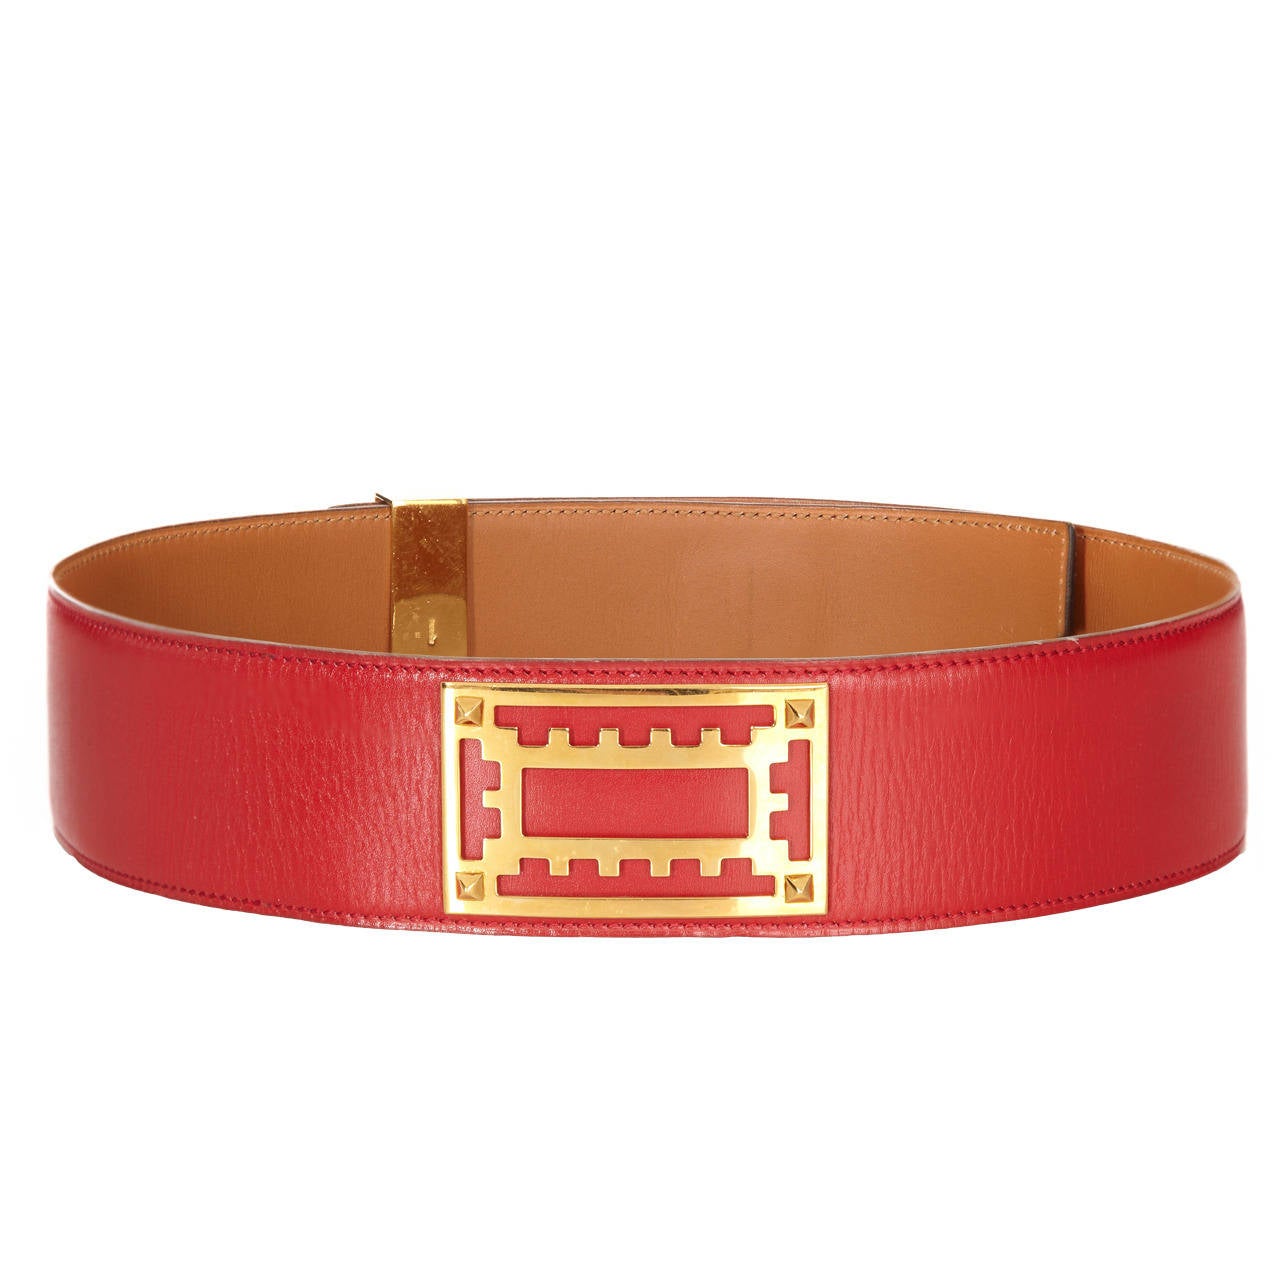 Red Hermès Collier de Chien Leather belt with gold-tone hardware and bar insert closure at front.  Indistinct circular date stamp (looks like a O which would date it to 1985). Very good condition with one very slight abrasion to the leather